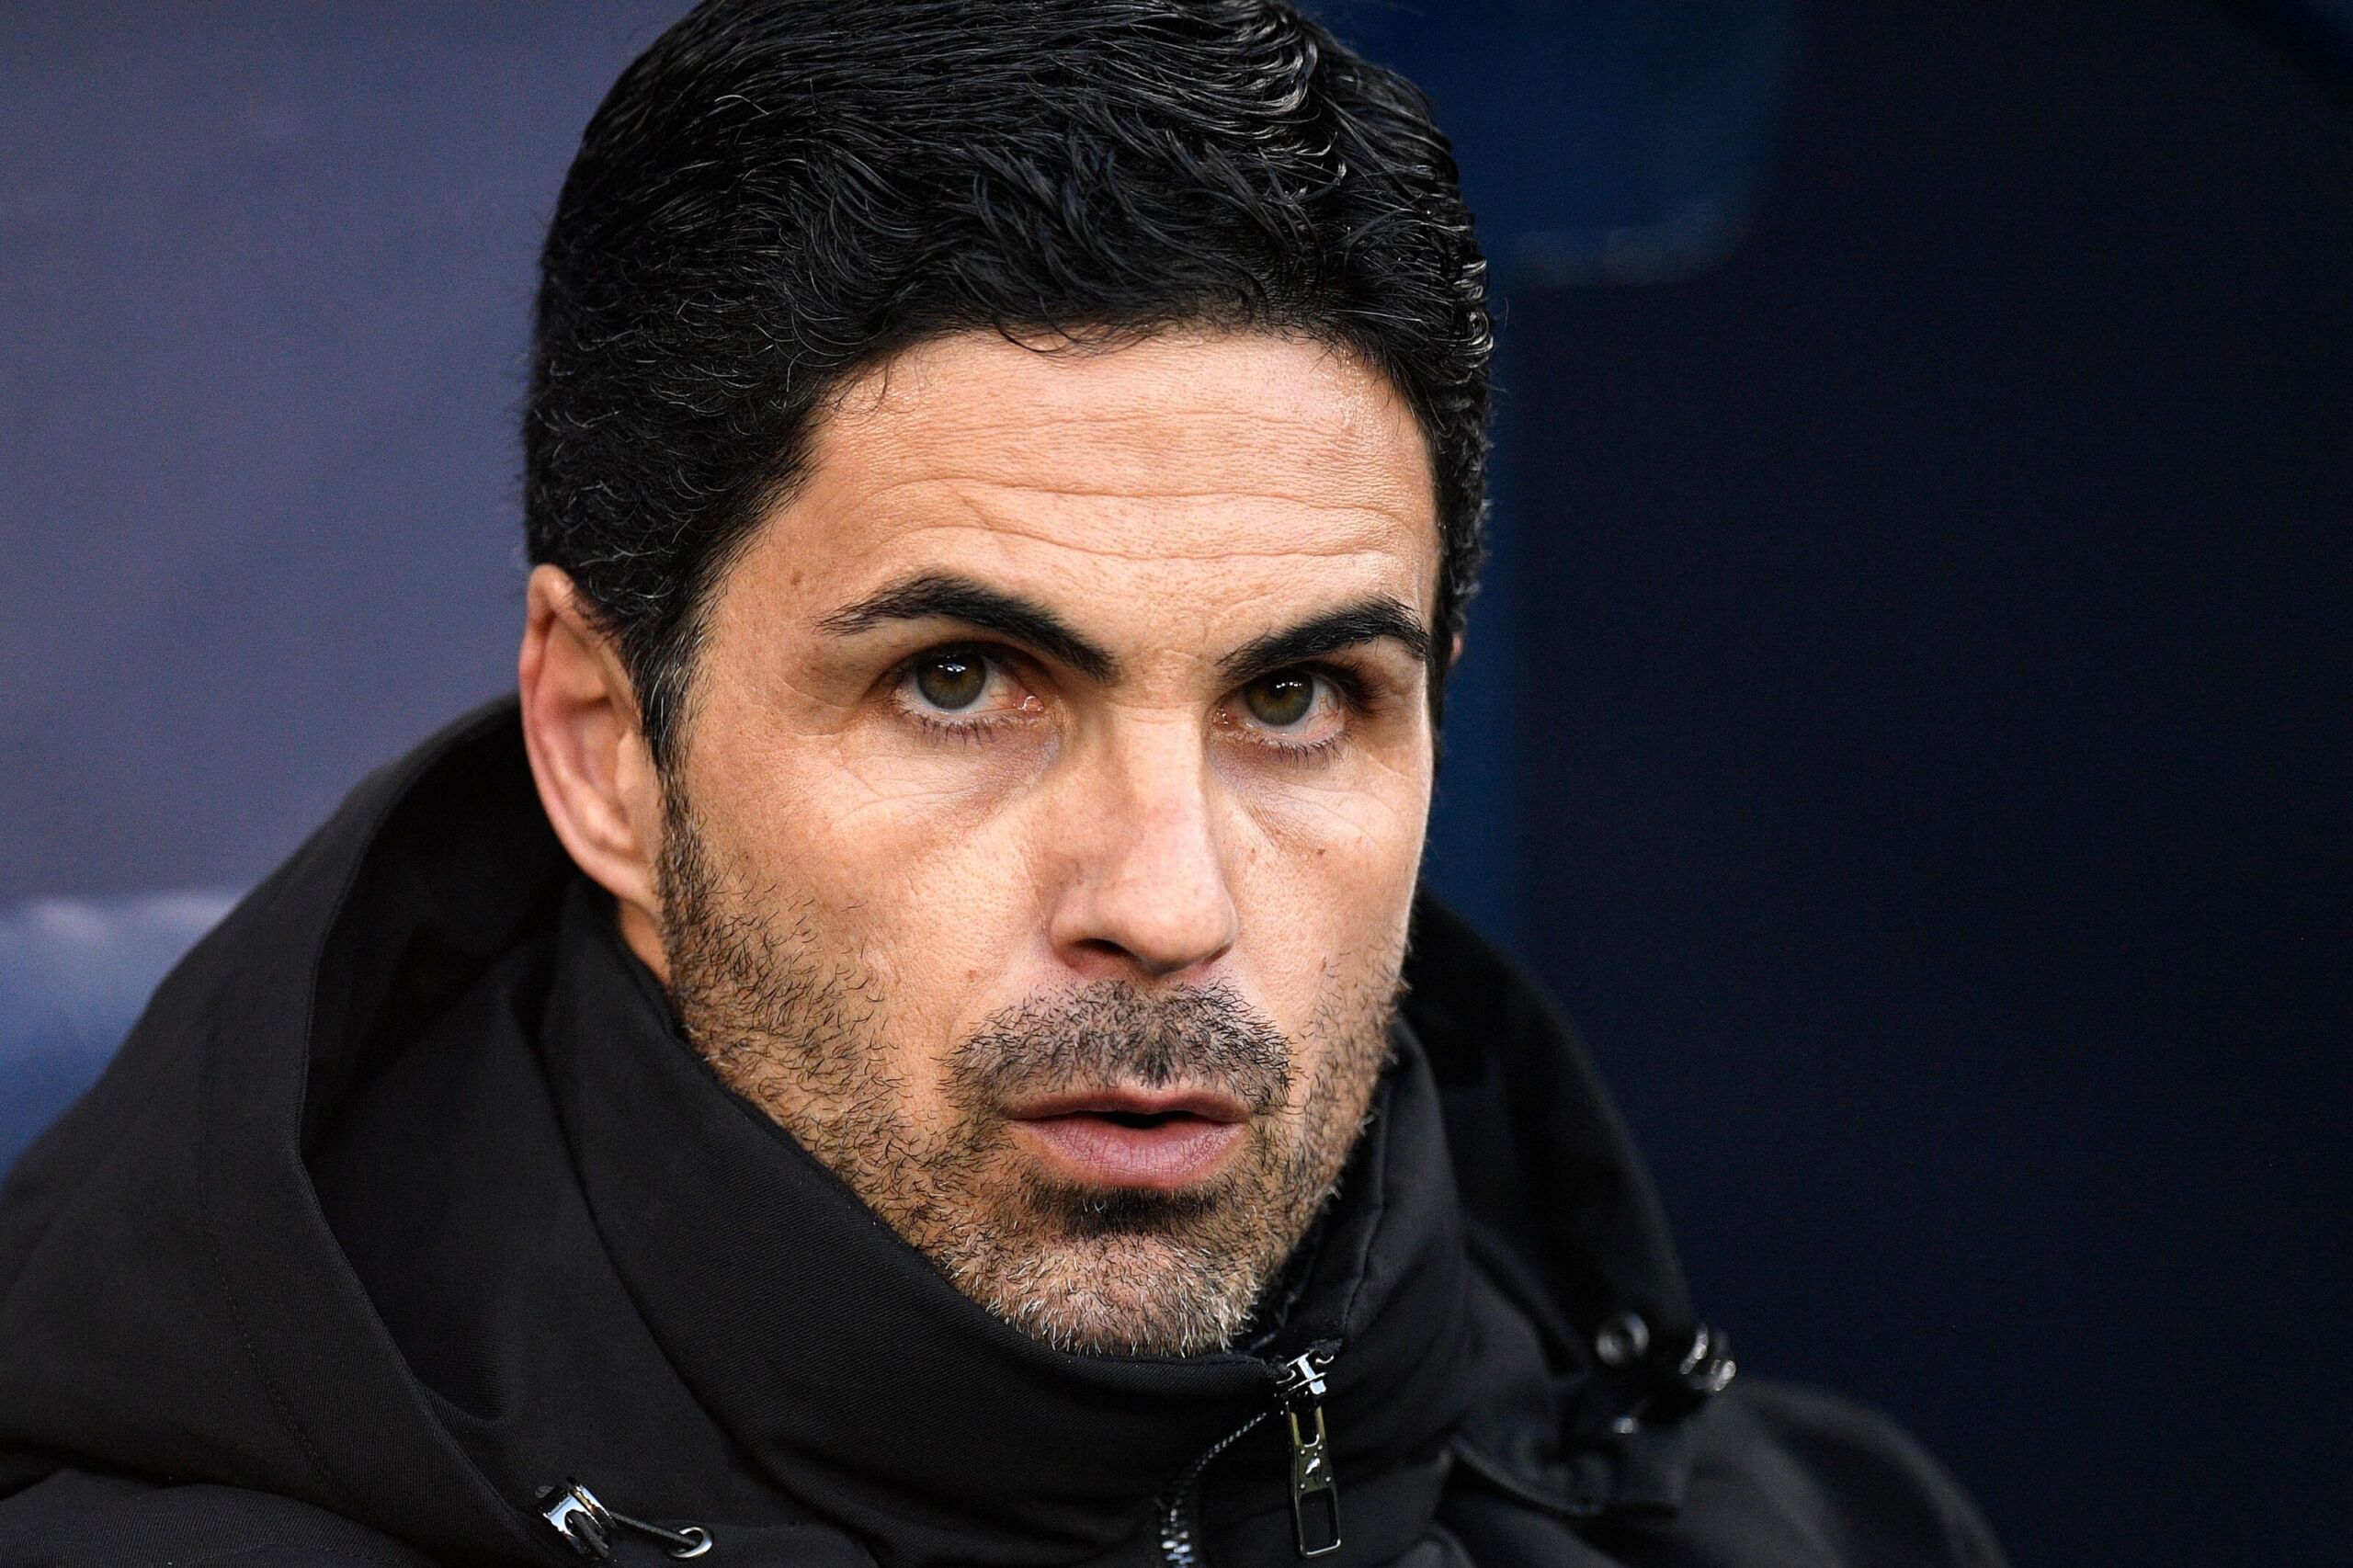 Arsenal's Arteta delighted with win at Palace despite Tomiyasu red card